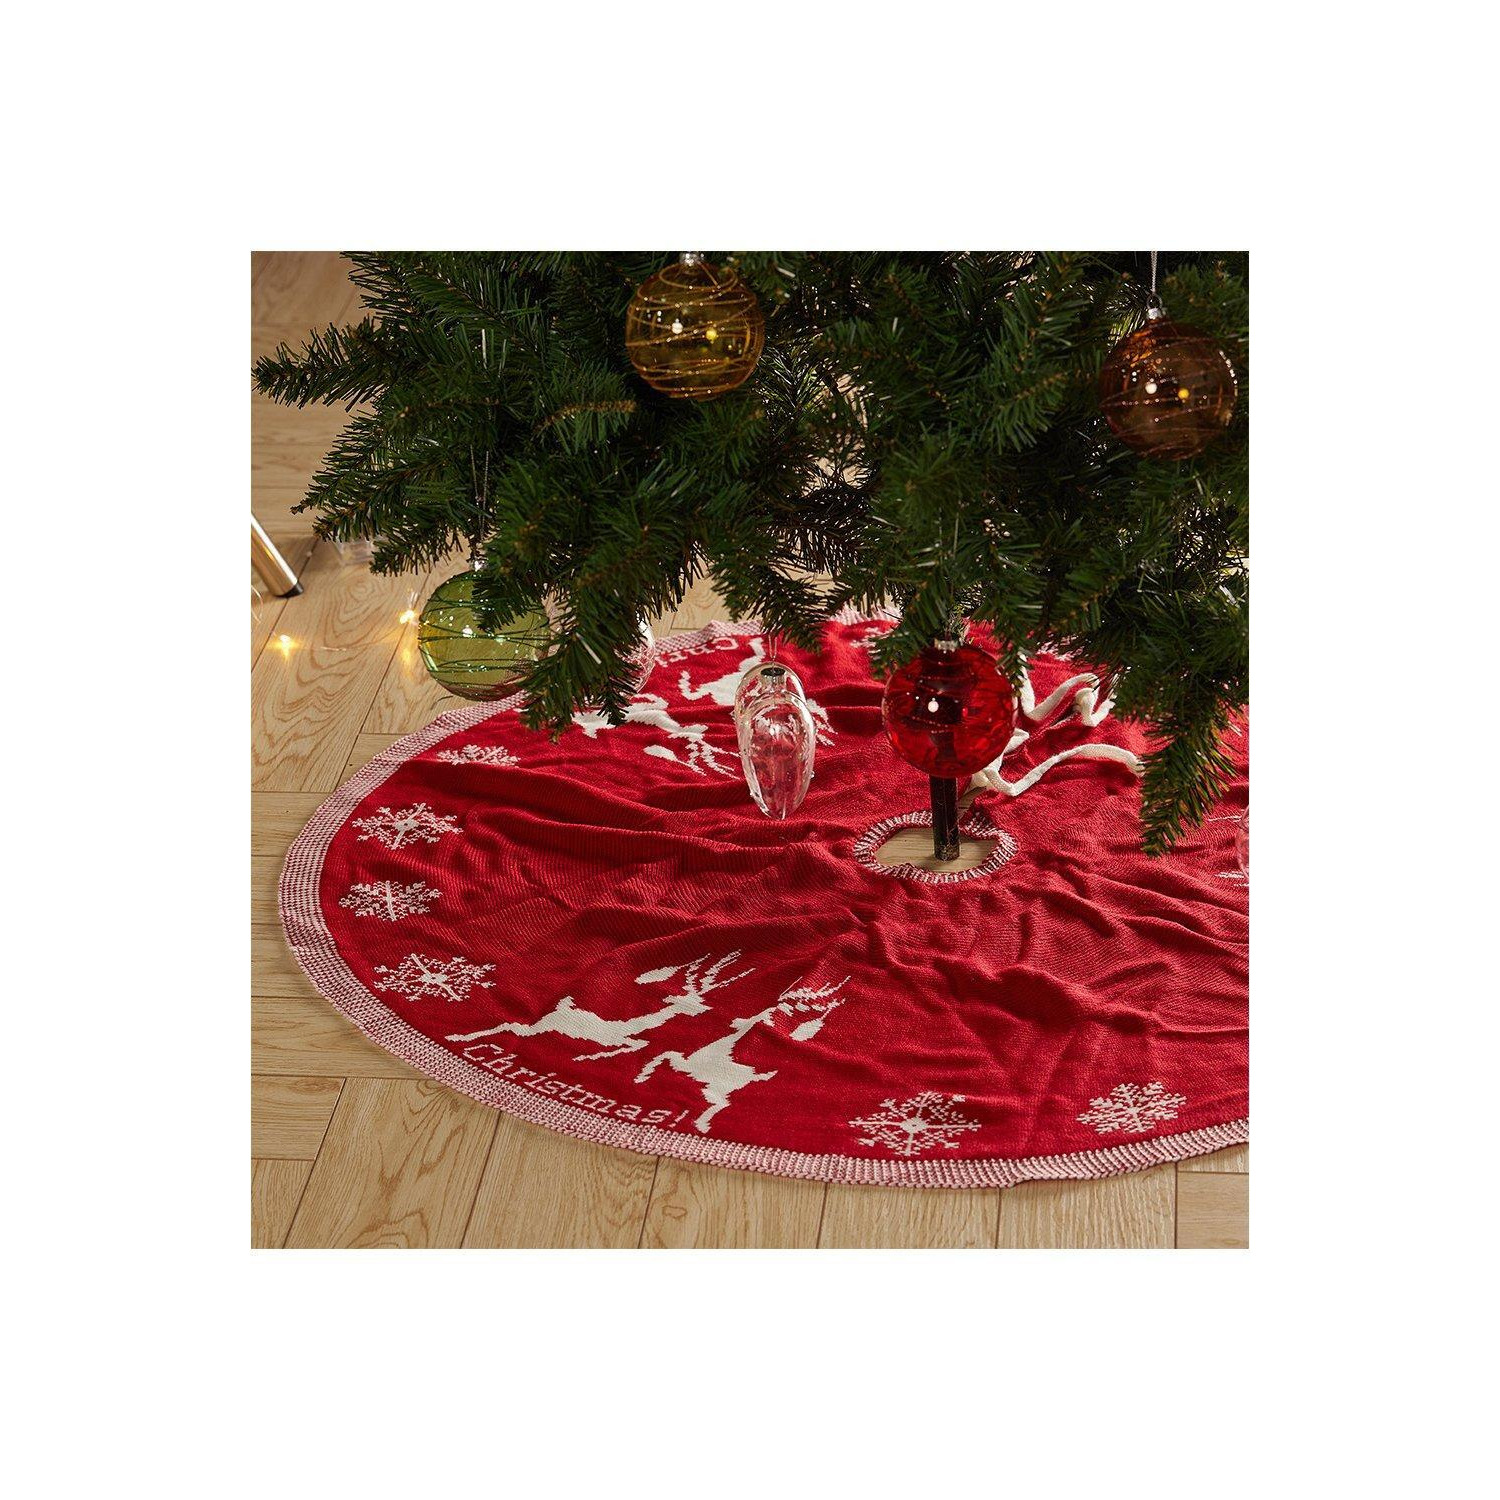 D95cm Rustic Knitted Double-Sided Christmas Tree Skirt with Snowflake and Reindeer Decor - image 1